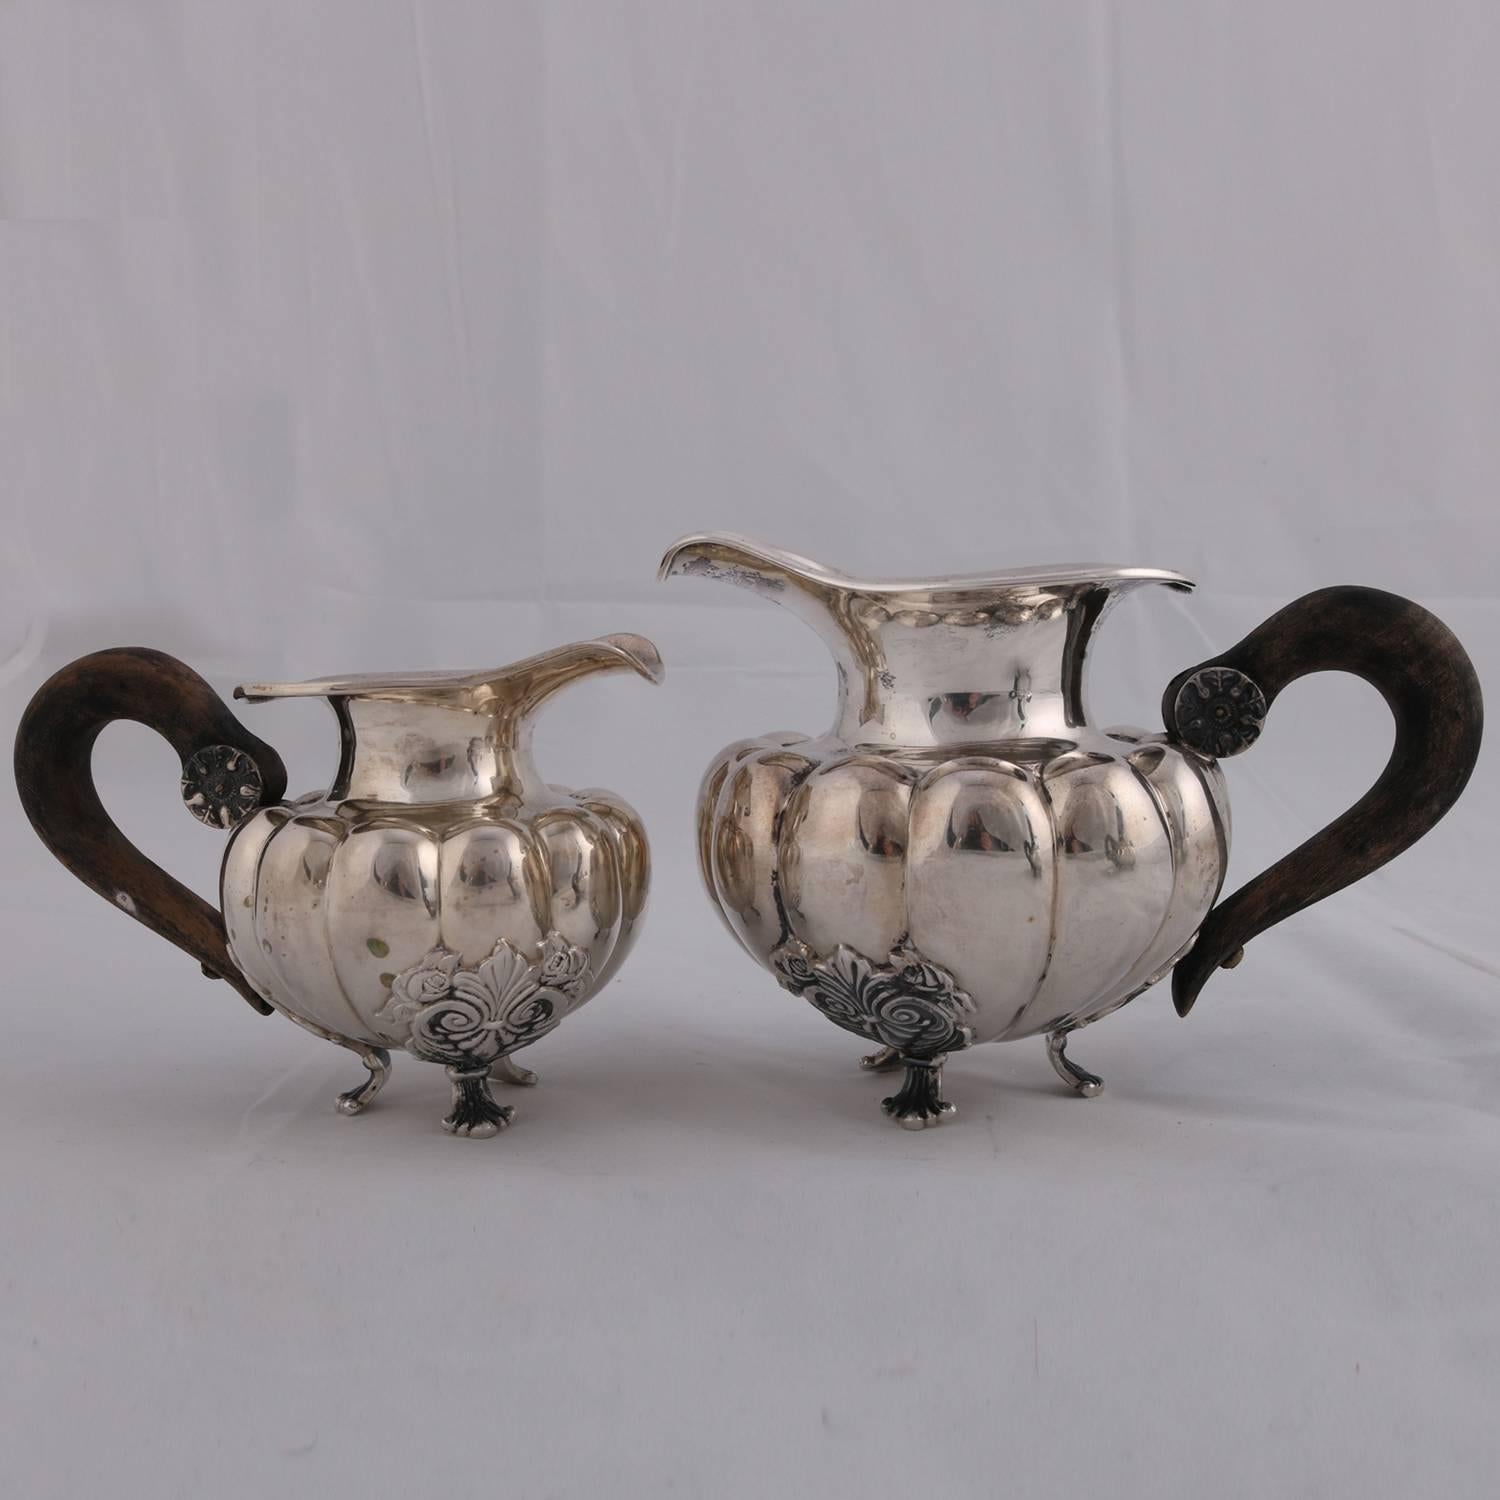 20th Century Large Six-Piece French Antique French .800 Silver Gadroon Tea Set, circa 1900